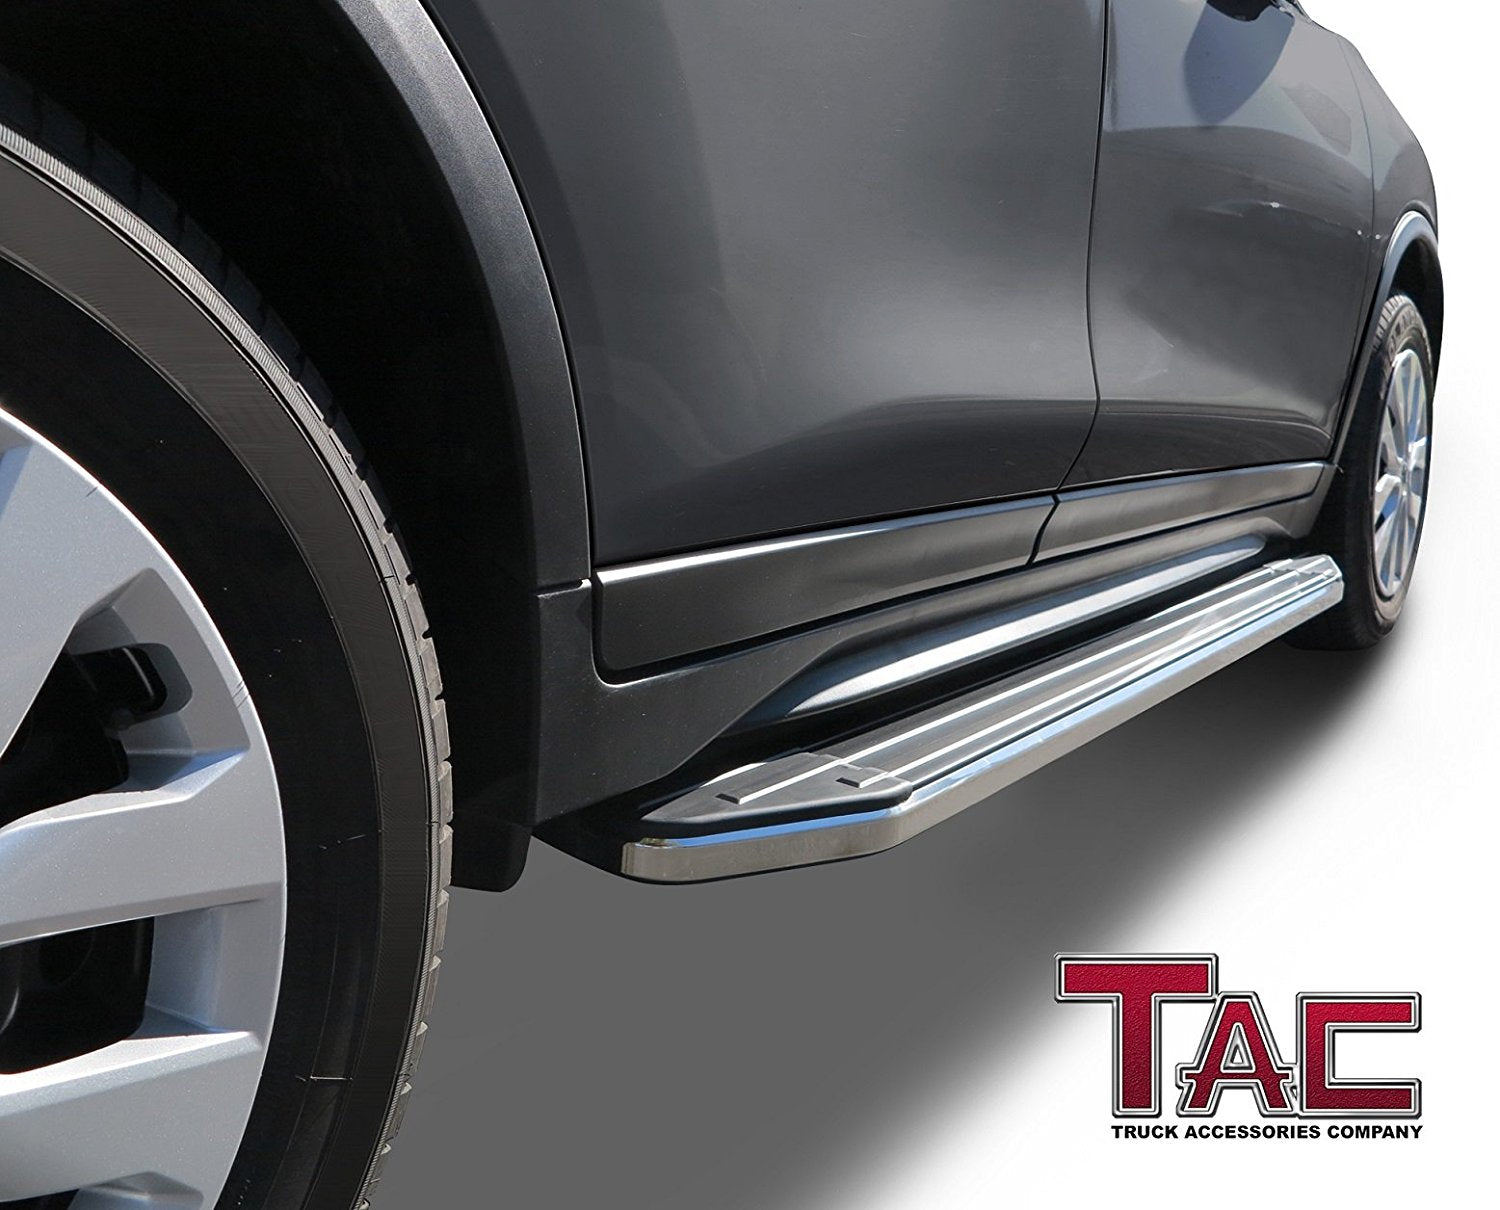 TAC ViewPoint Running Boards Fit 2010-2017 Chevy Equinox / GMC Terrain (Excl. Denali) SUV | Side Steps | Nerf Bars | Side Bars - 0